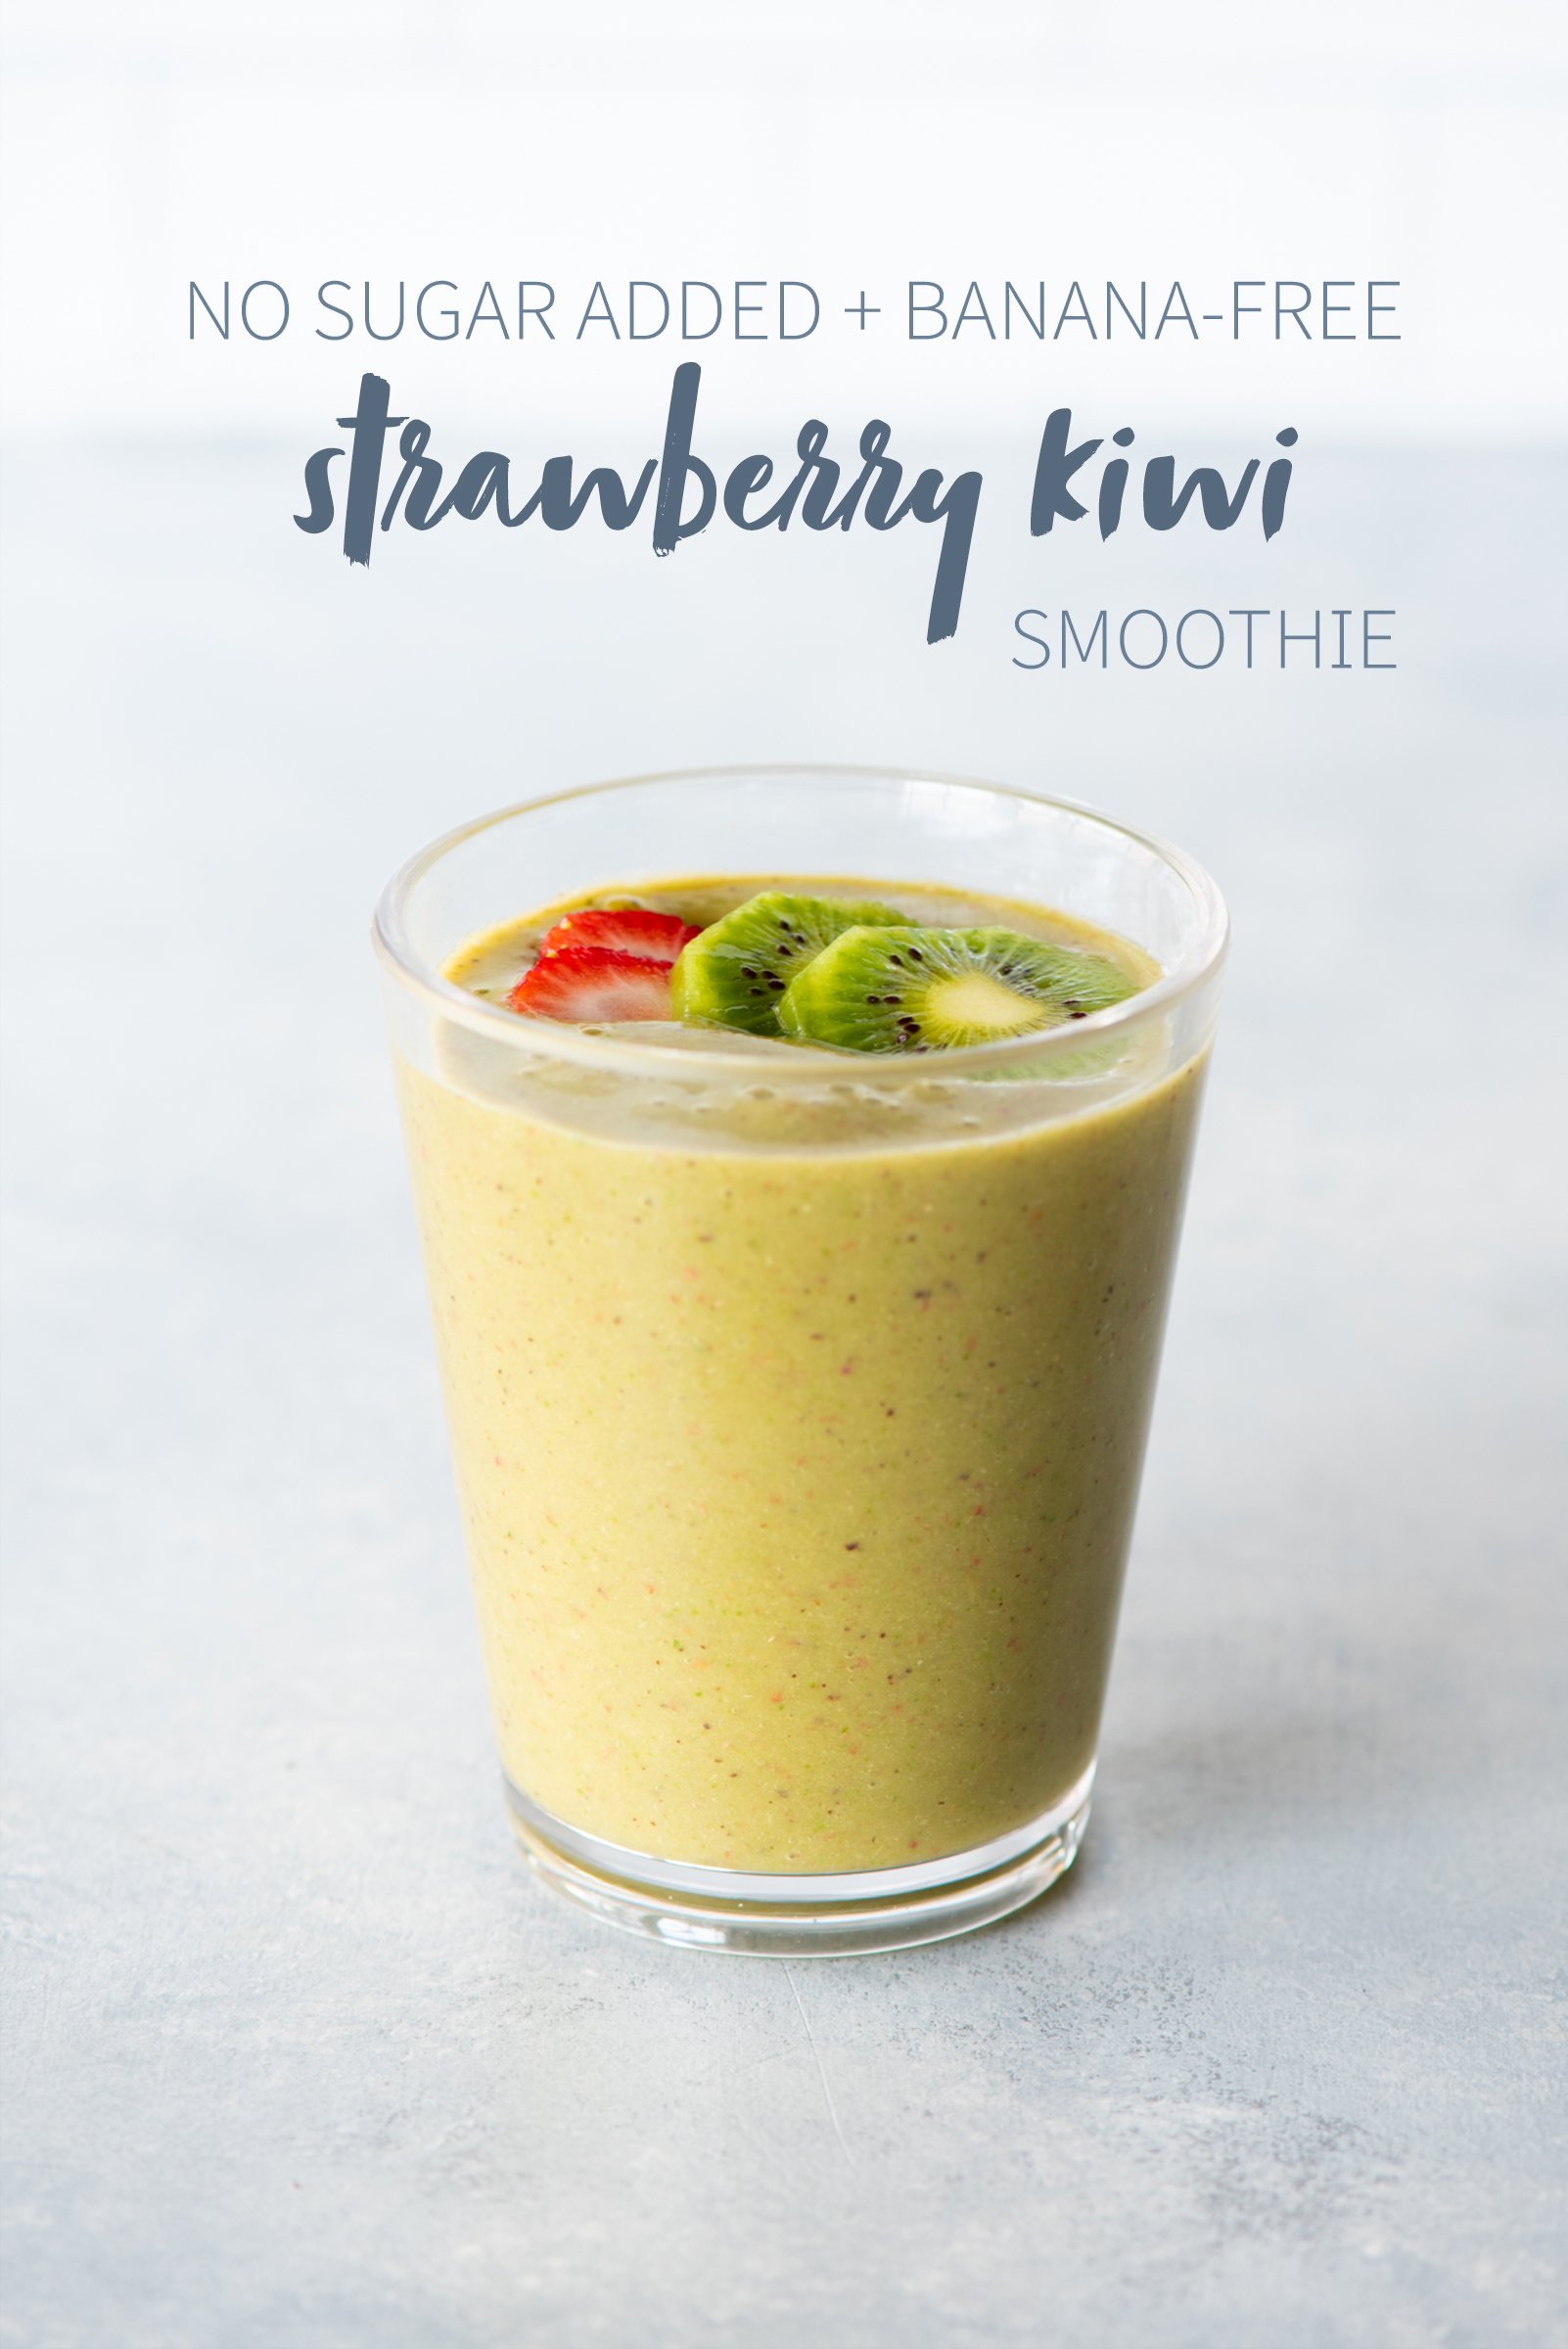 Strawberry kiwi smoothie in a clear glass topped with sliced fruit. A text overlay reads "No Sugar Added + Banana-Free Strawberry Kiwi Smoothie."